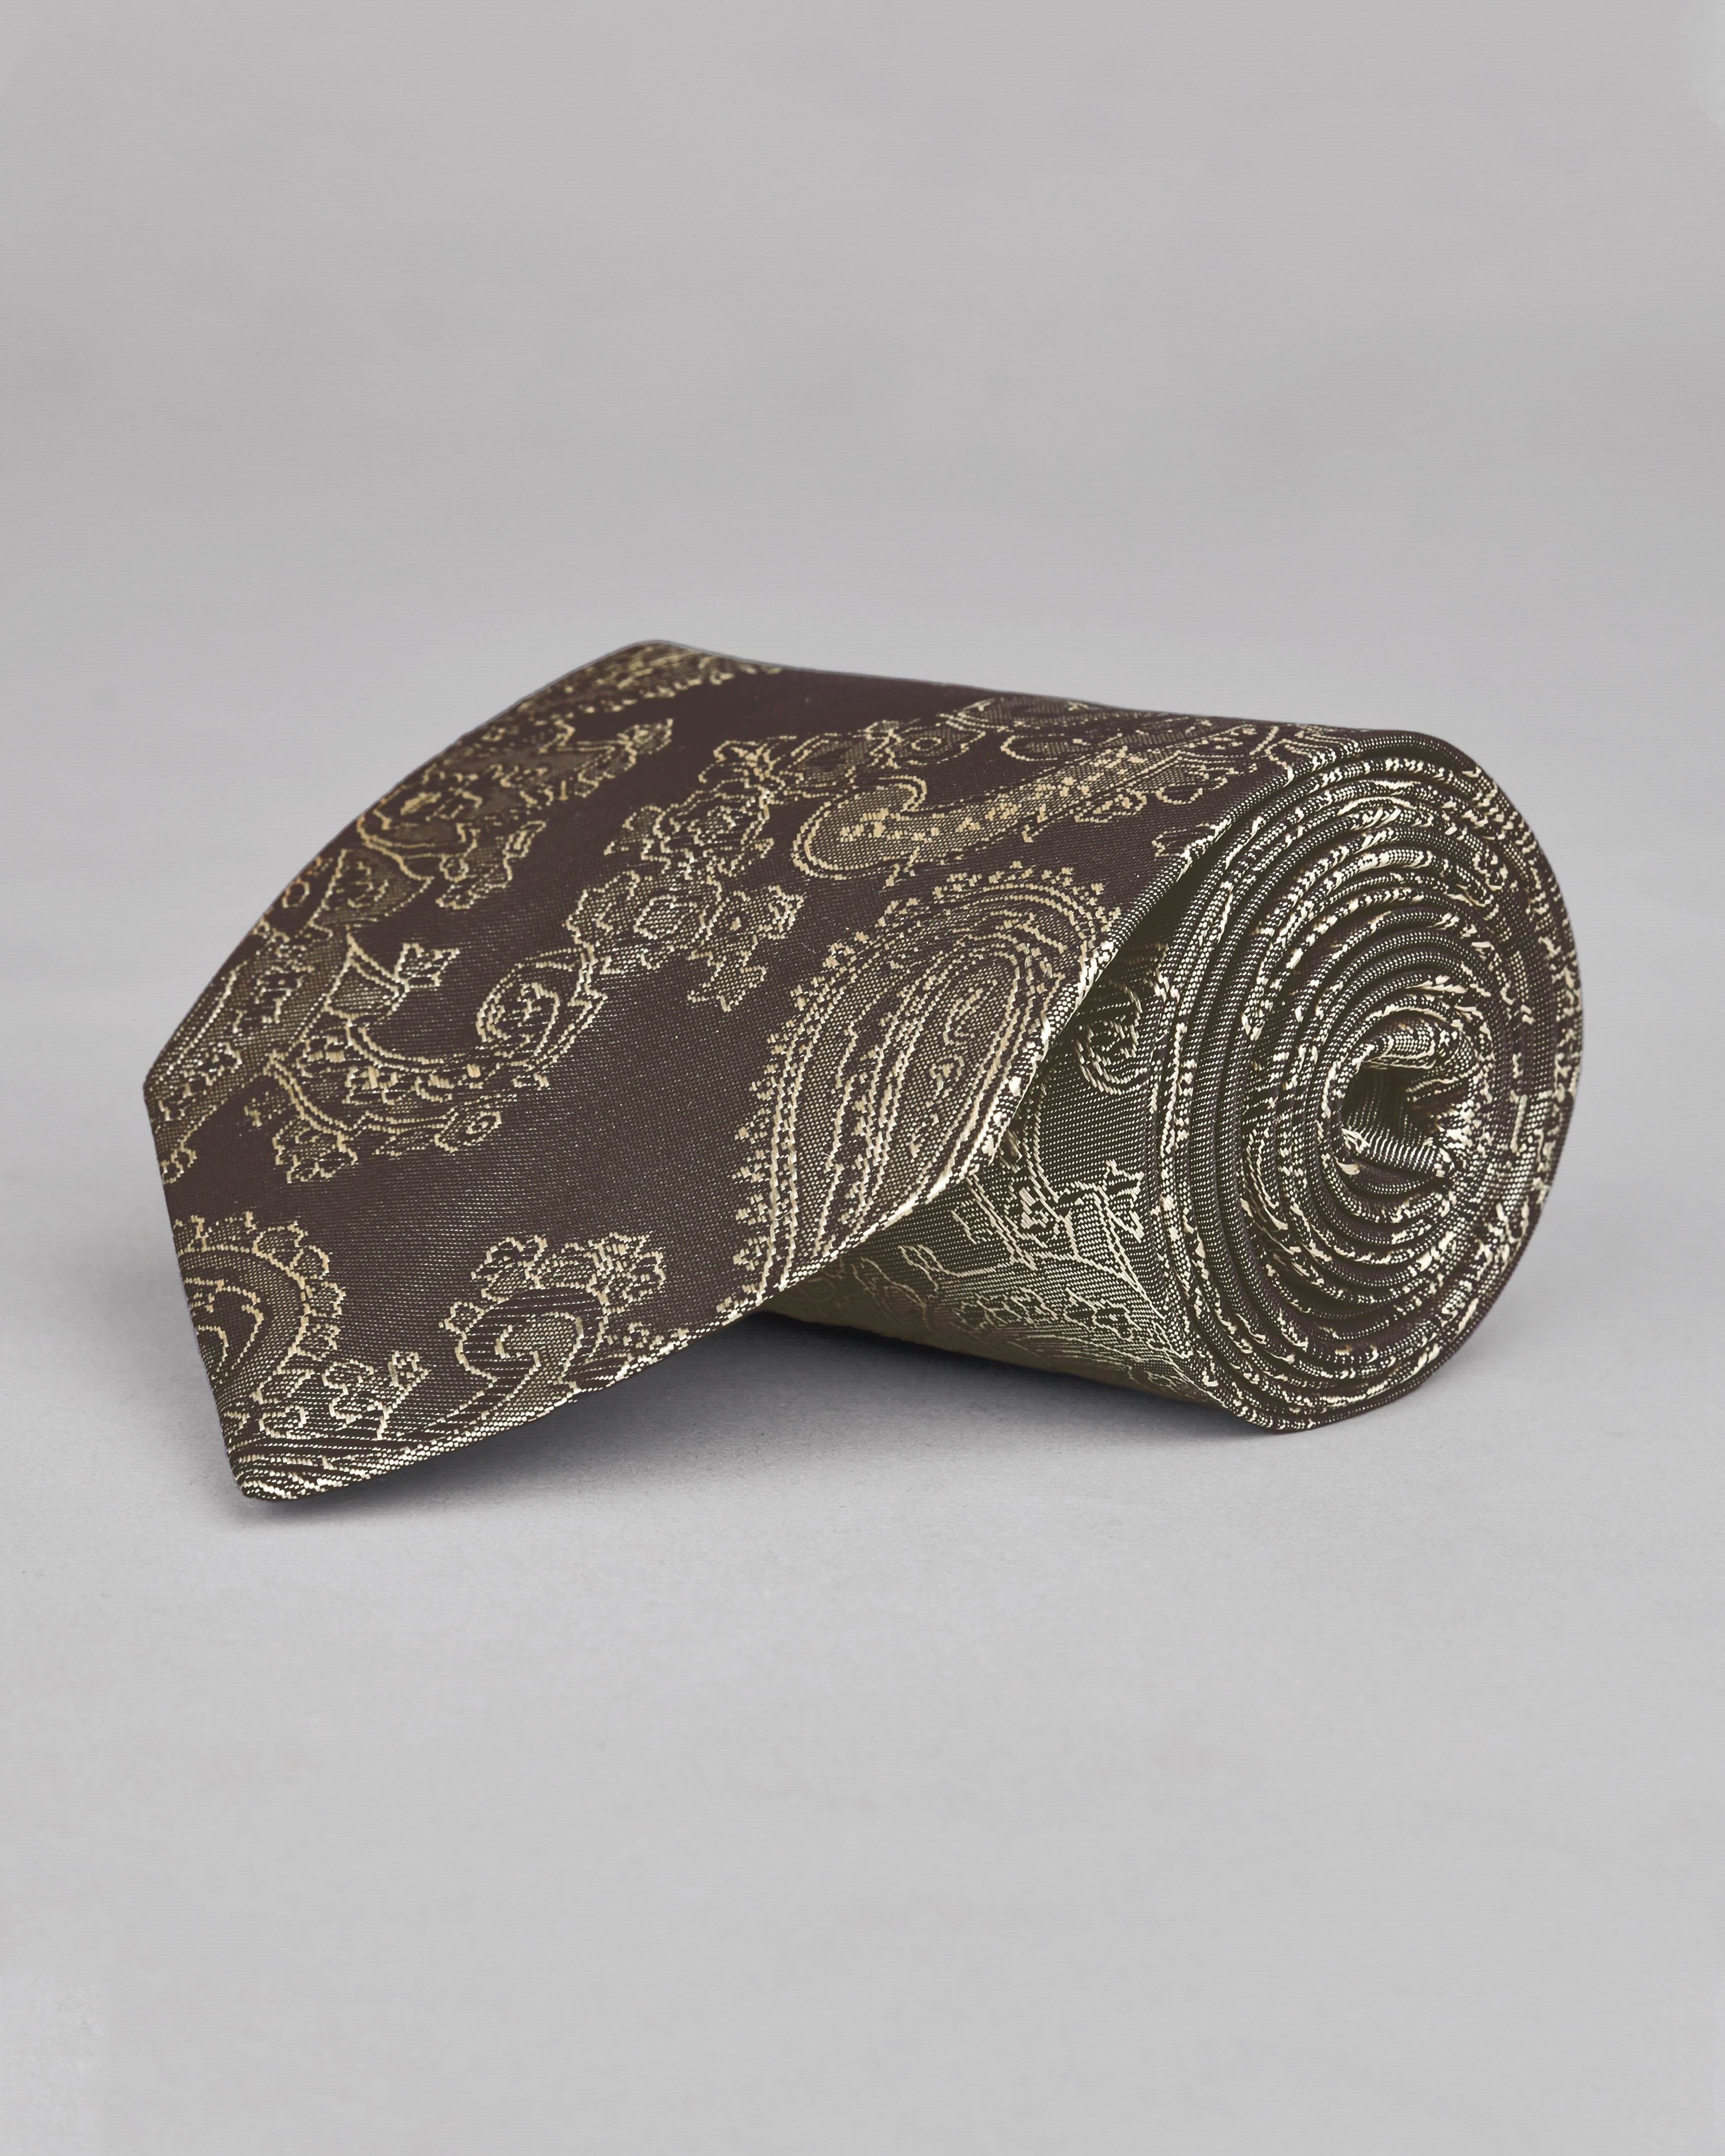 Olive Grey Paisley Jacquard Tie with Free Pocket square